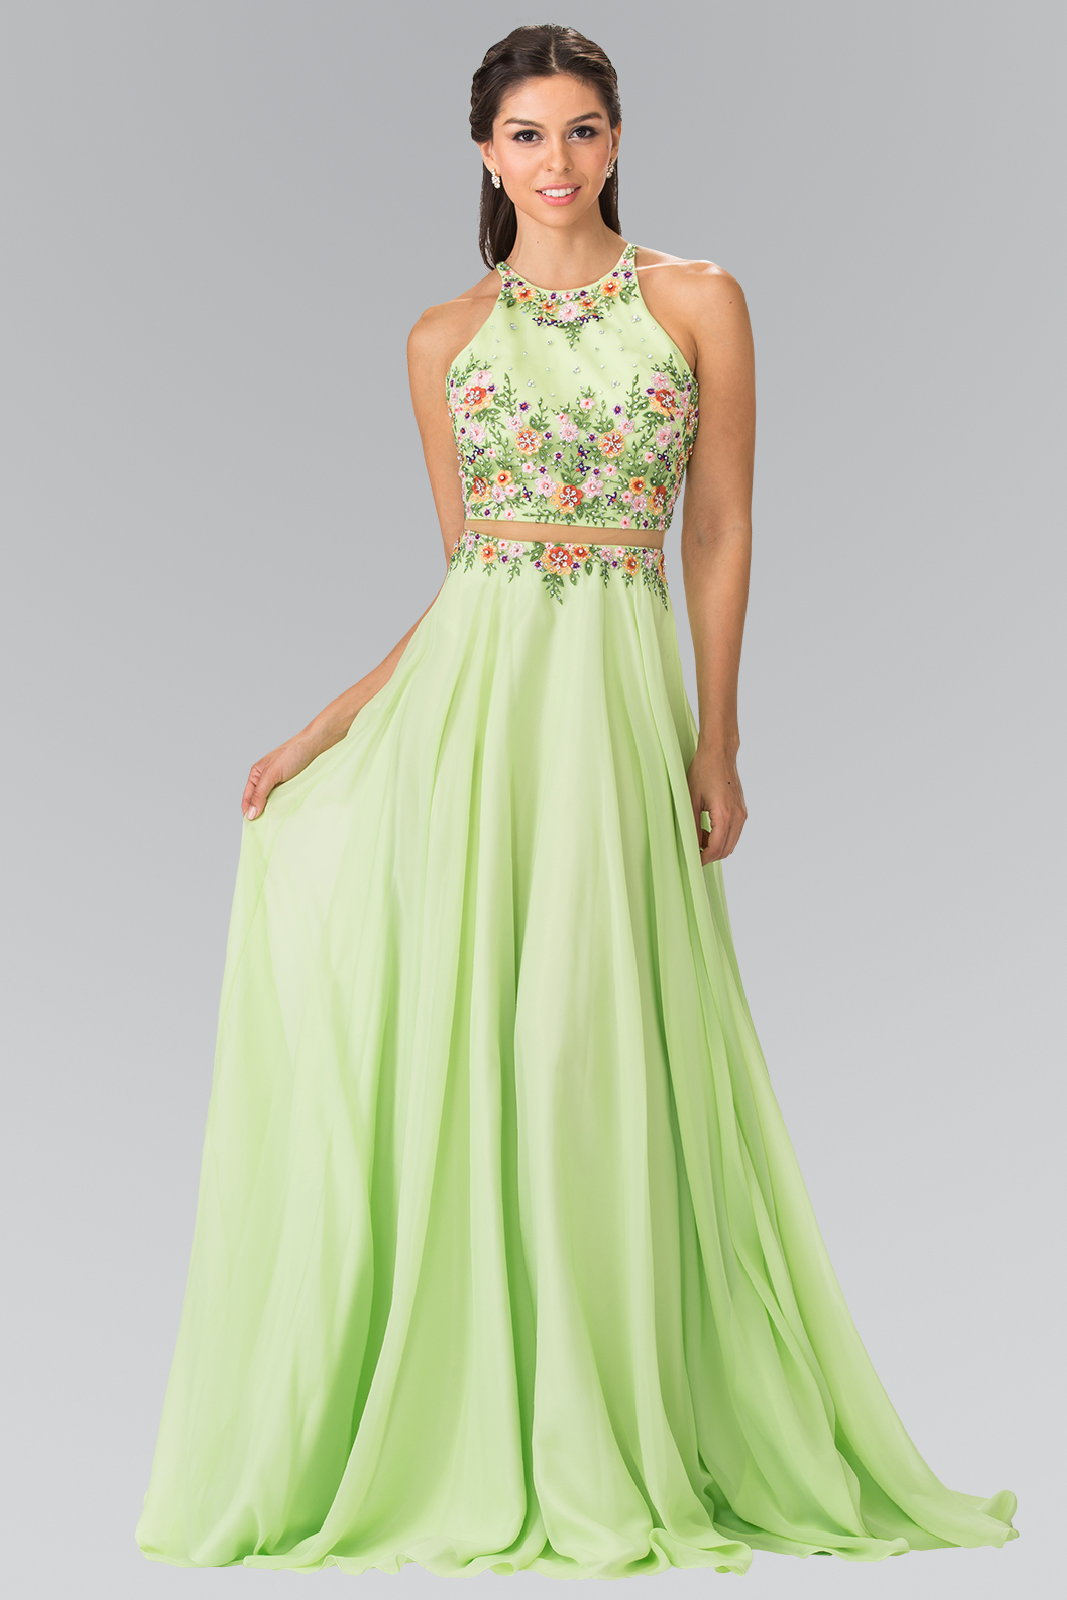 Neon green chiffon sequin decorated long prom dress